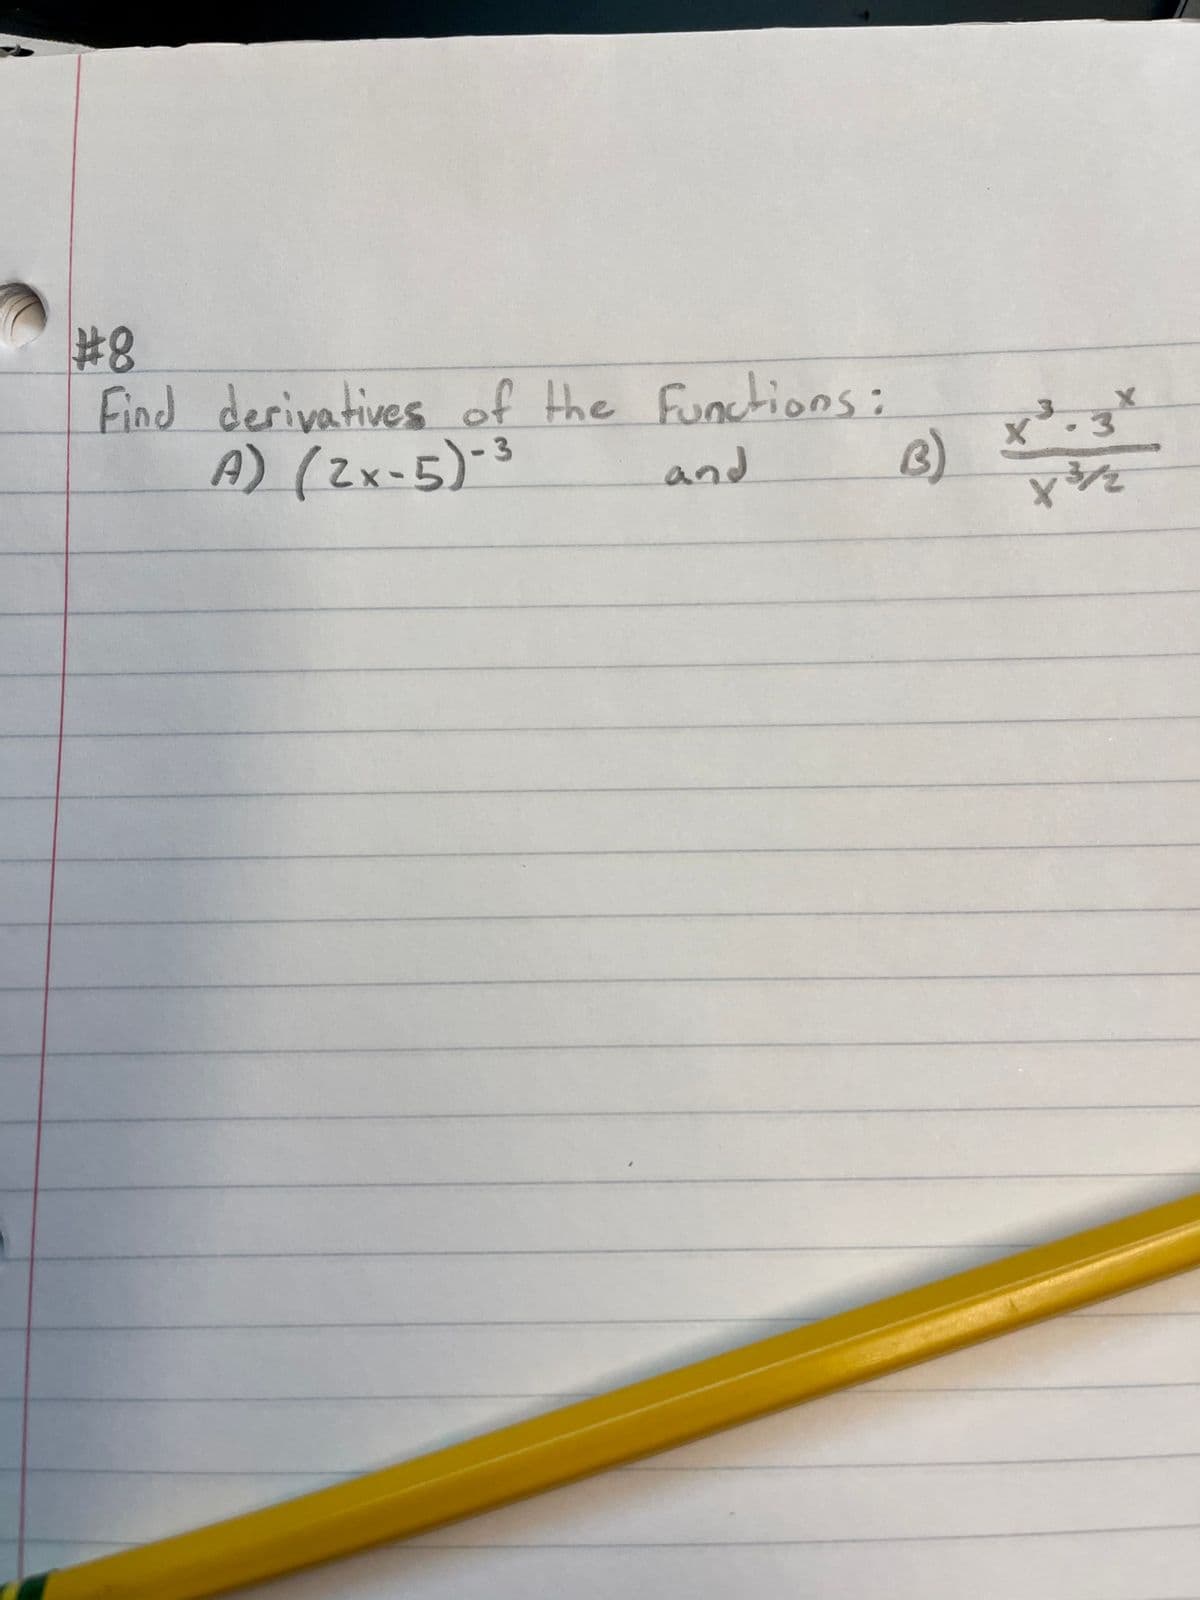 #38
Find derivatives of the Functions:
A) (Zx-5)-3
and
B)
